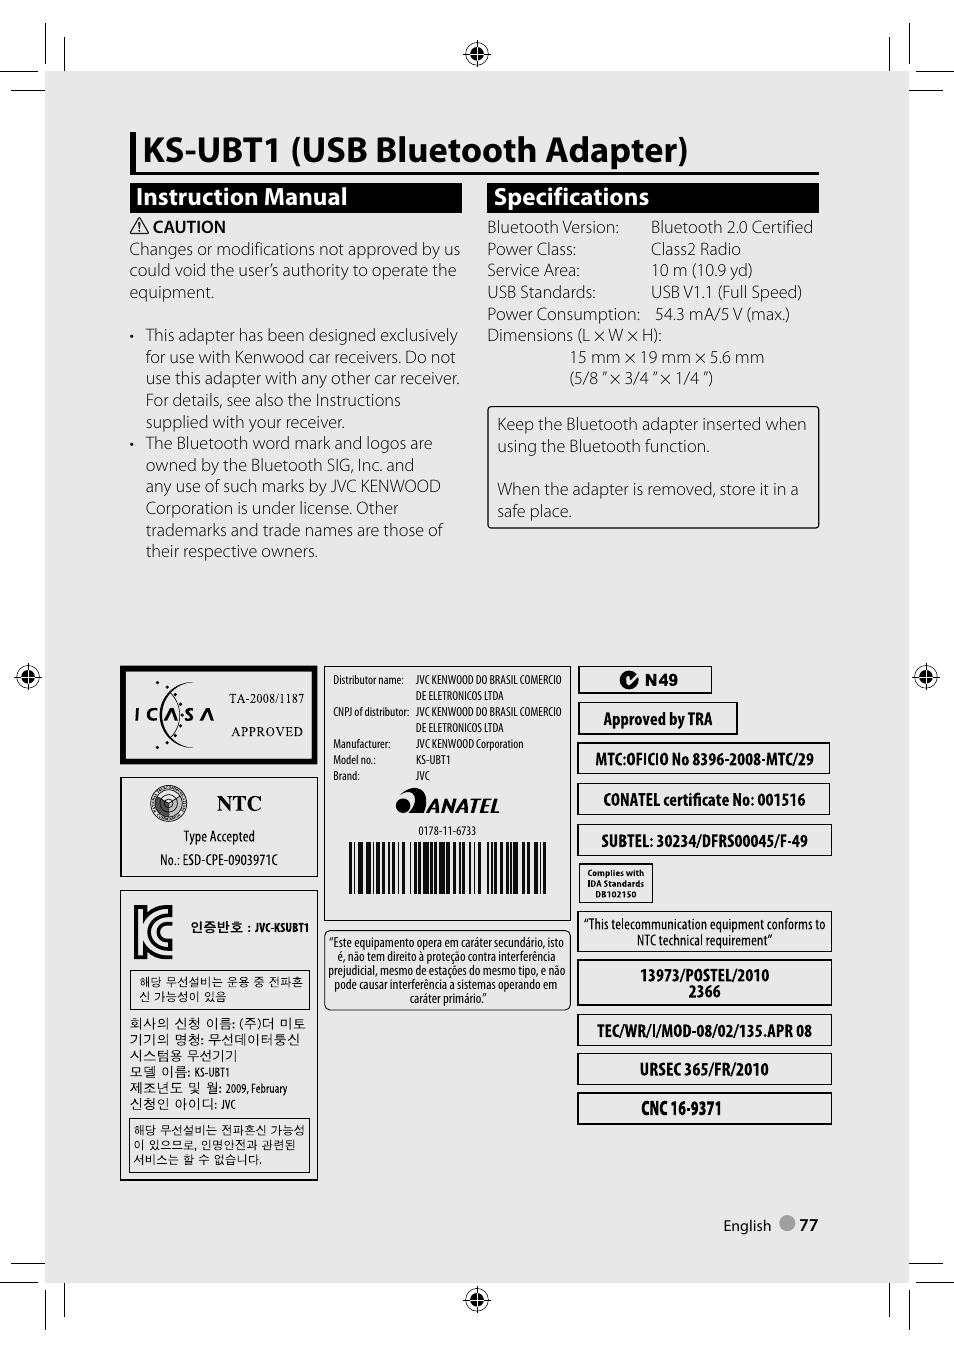 Ks-ubt1 (usb bluetooth adapter), Instruction manual, Specifications |  Kenwood DDX3021 User Manual | Page 77 / 80